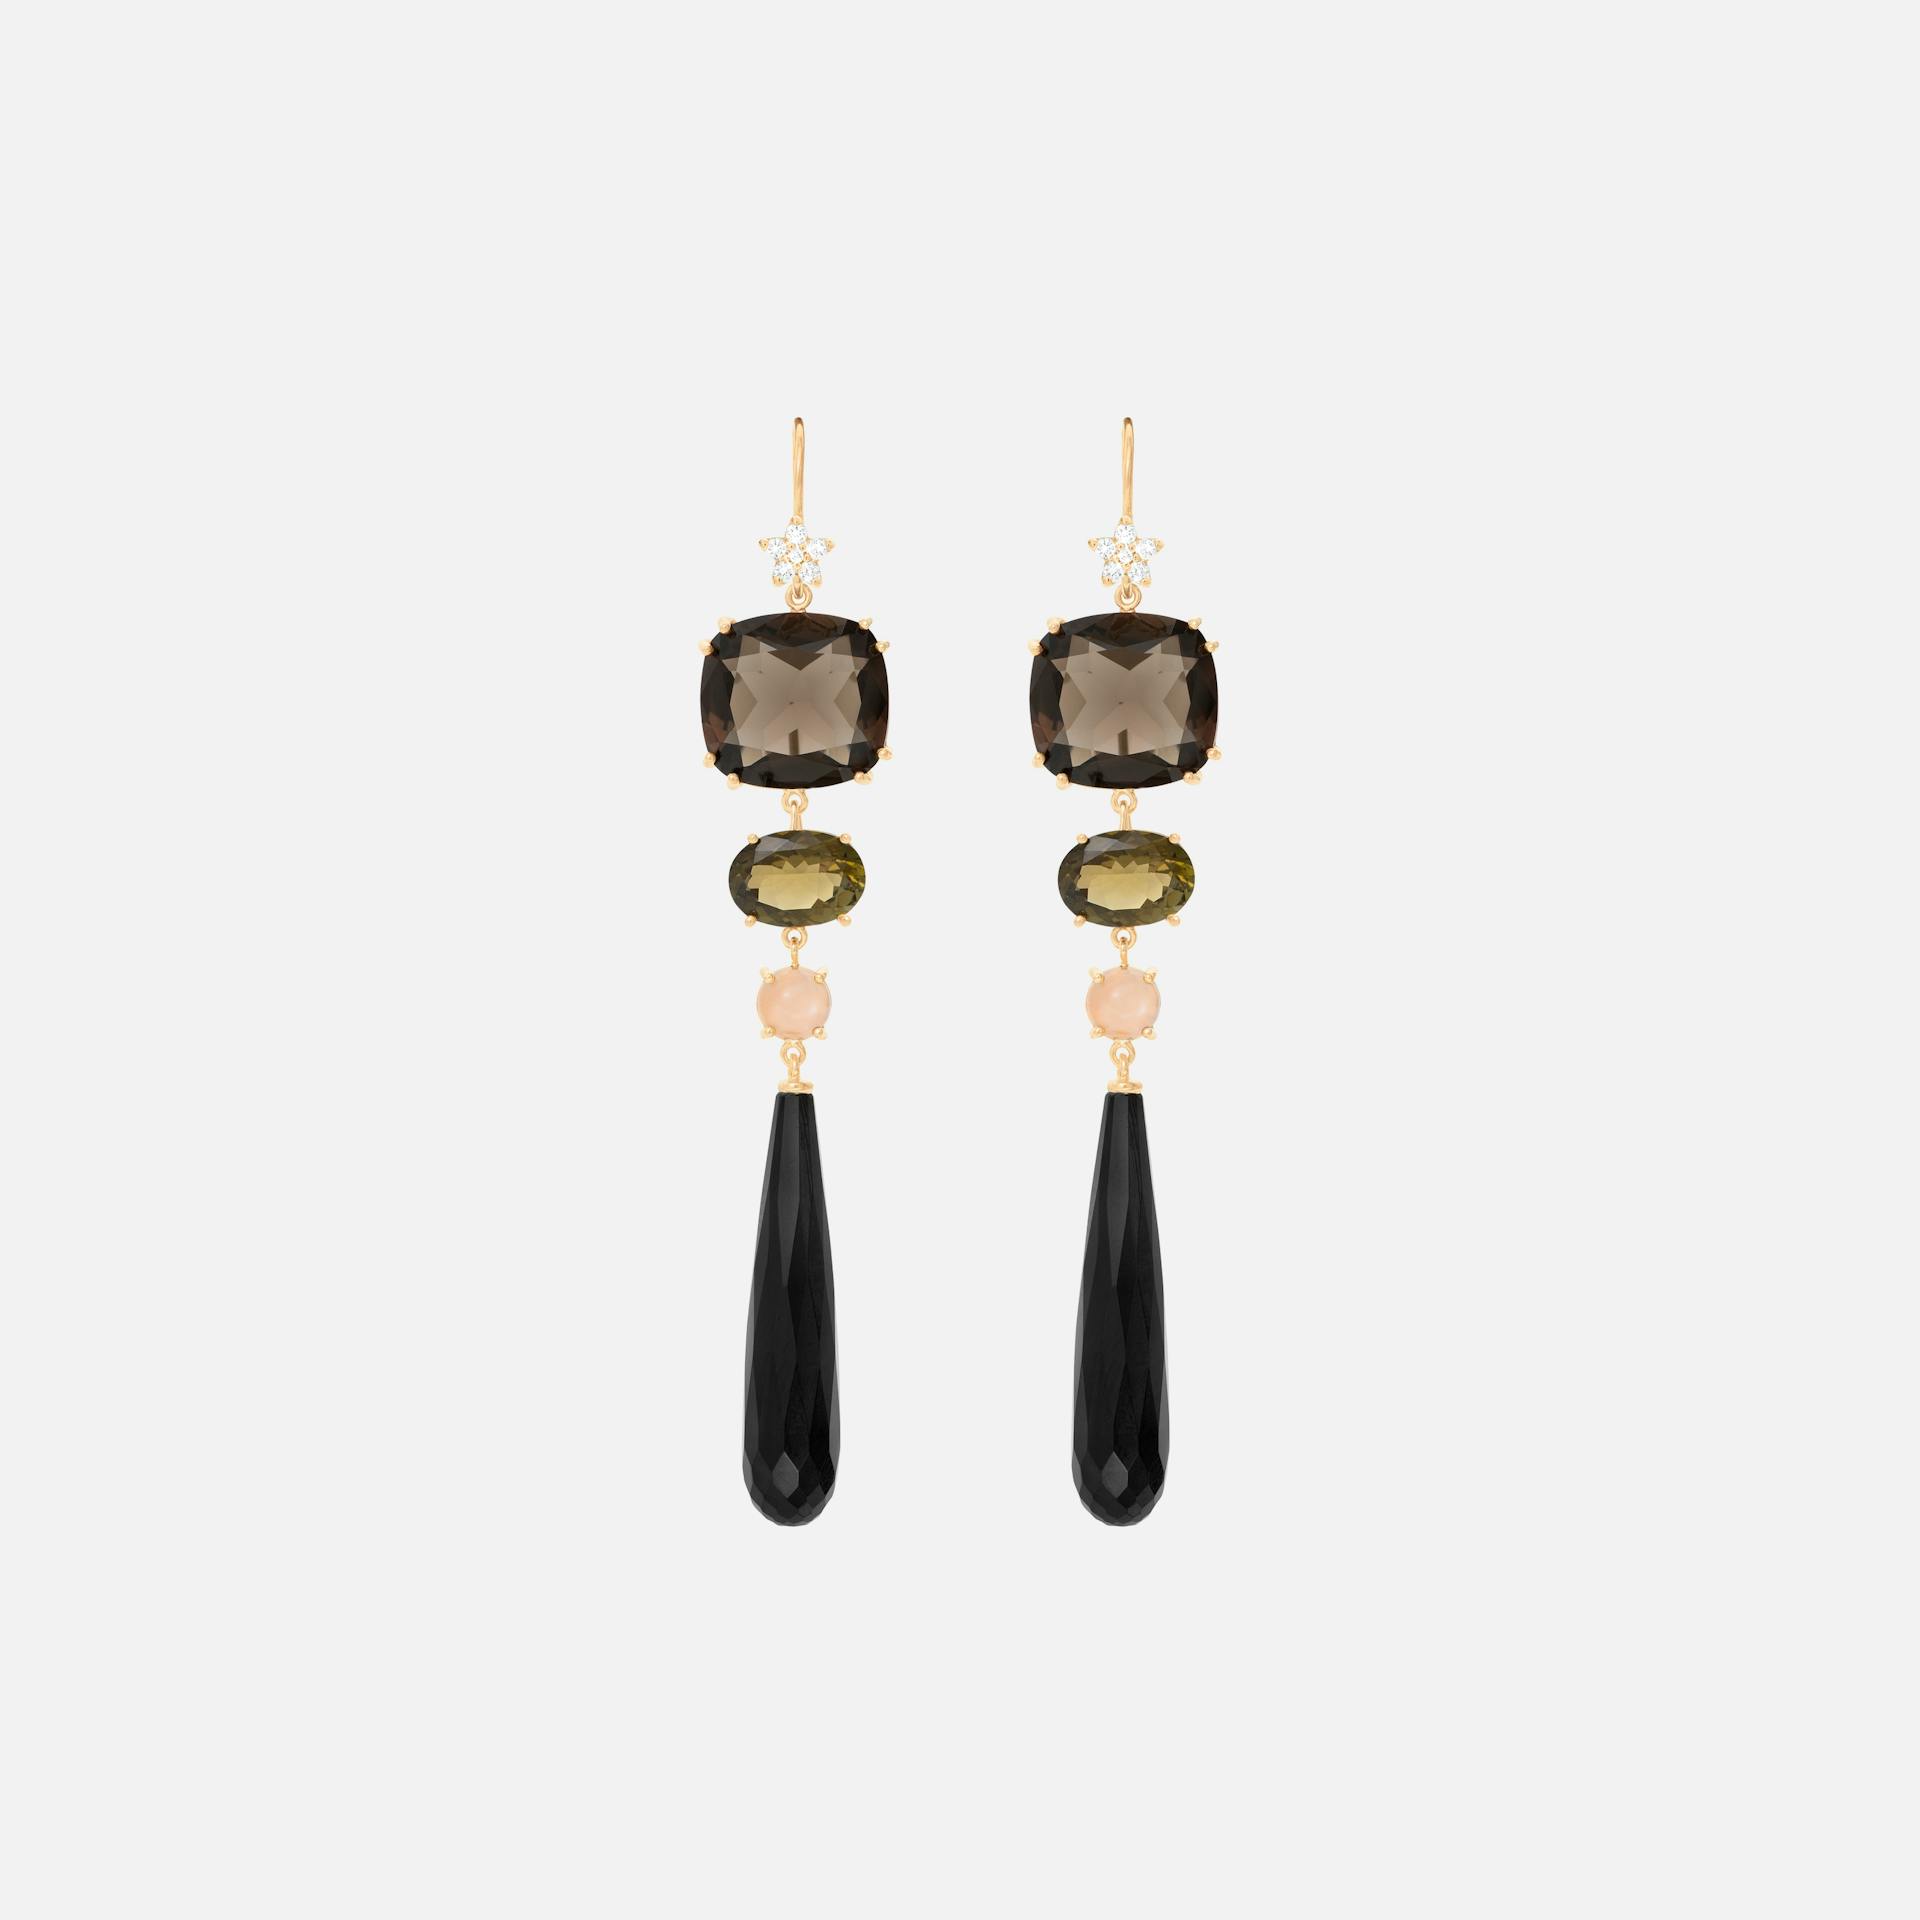 Lotus Earrings in Gold with Diamonds, Smoky Quartz, Tourmaline, Moonstone & Facetted Onyx Drops